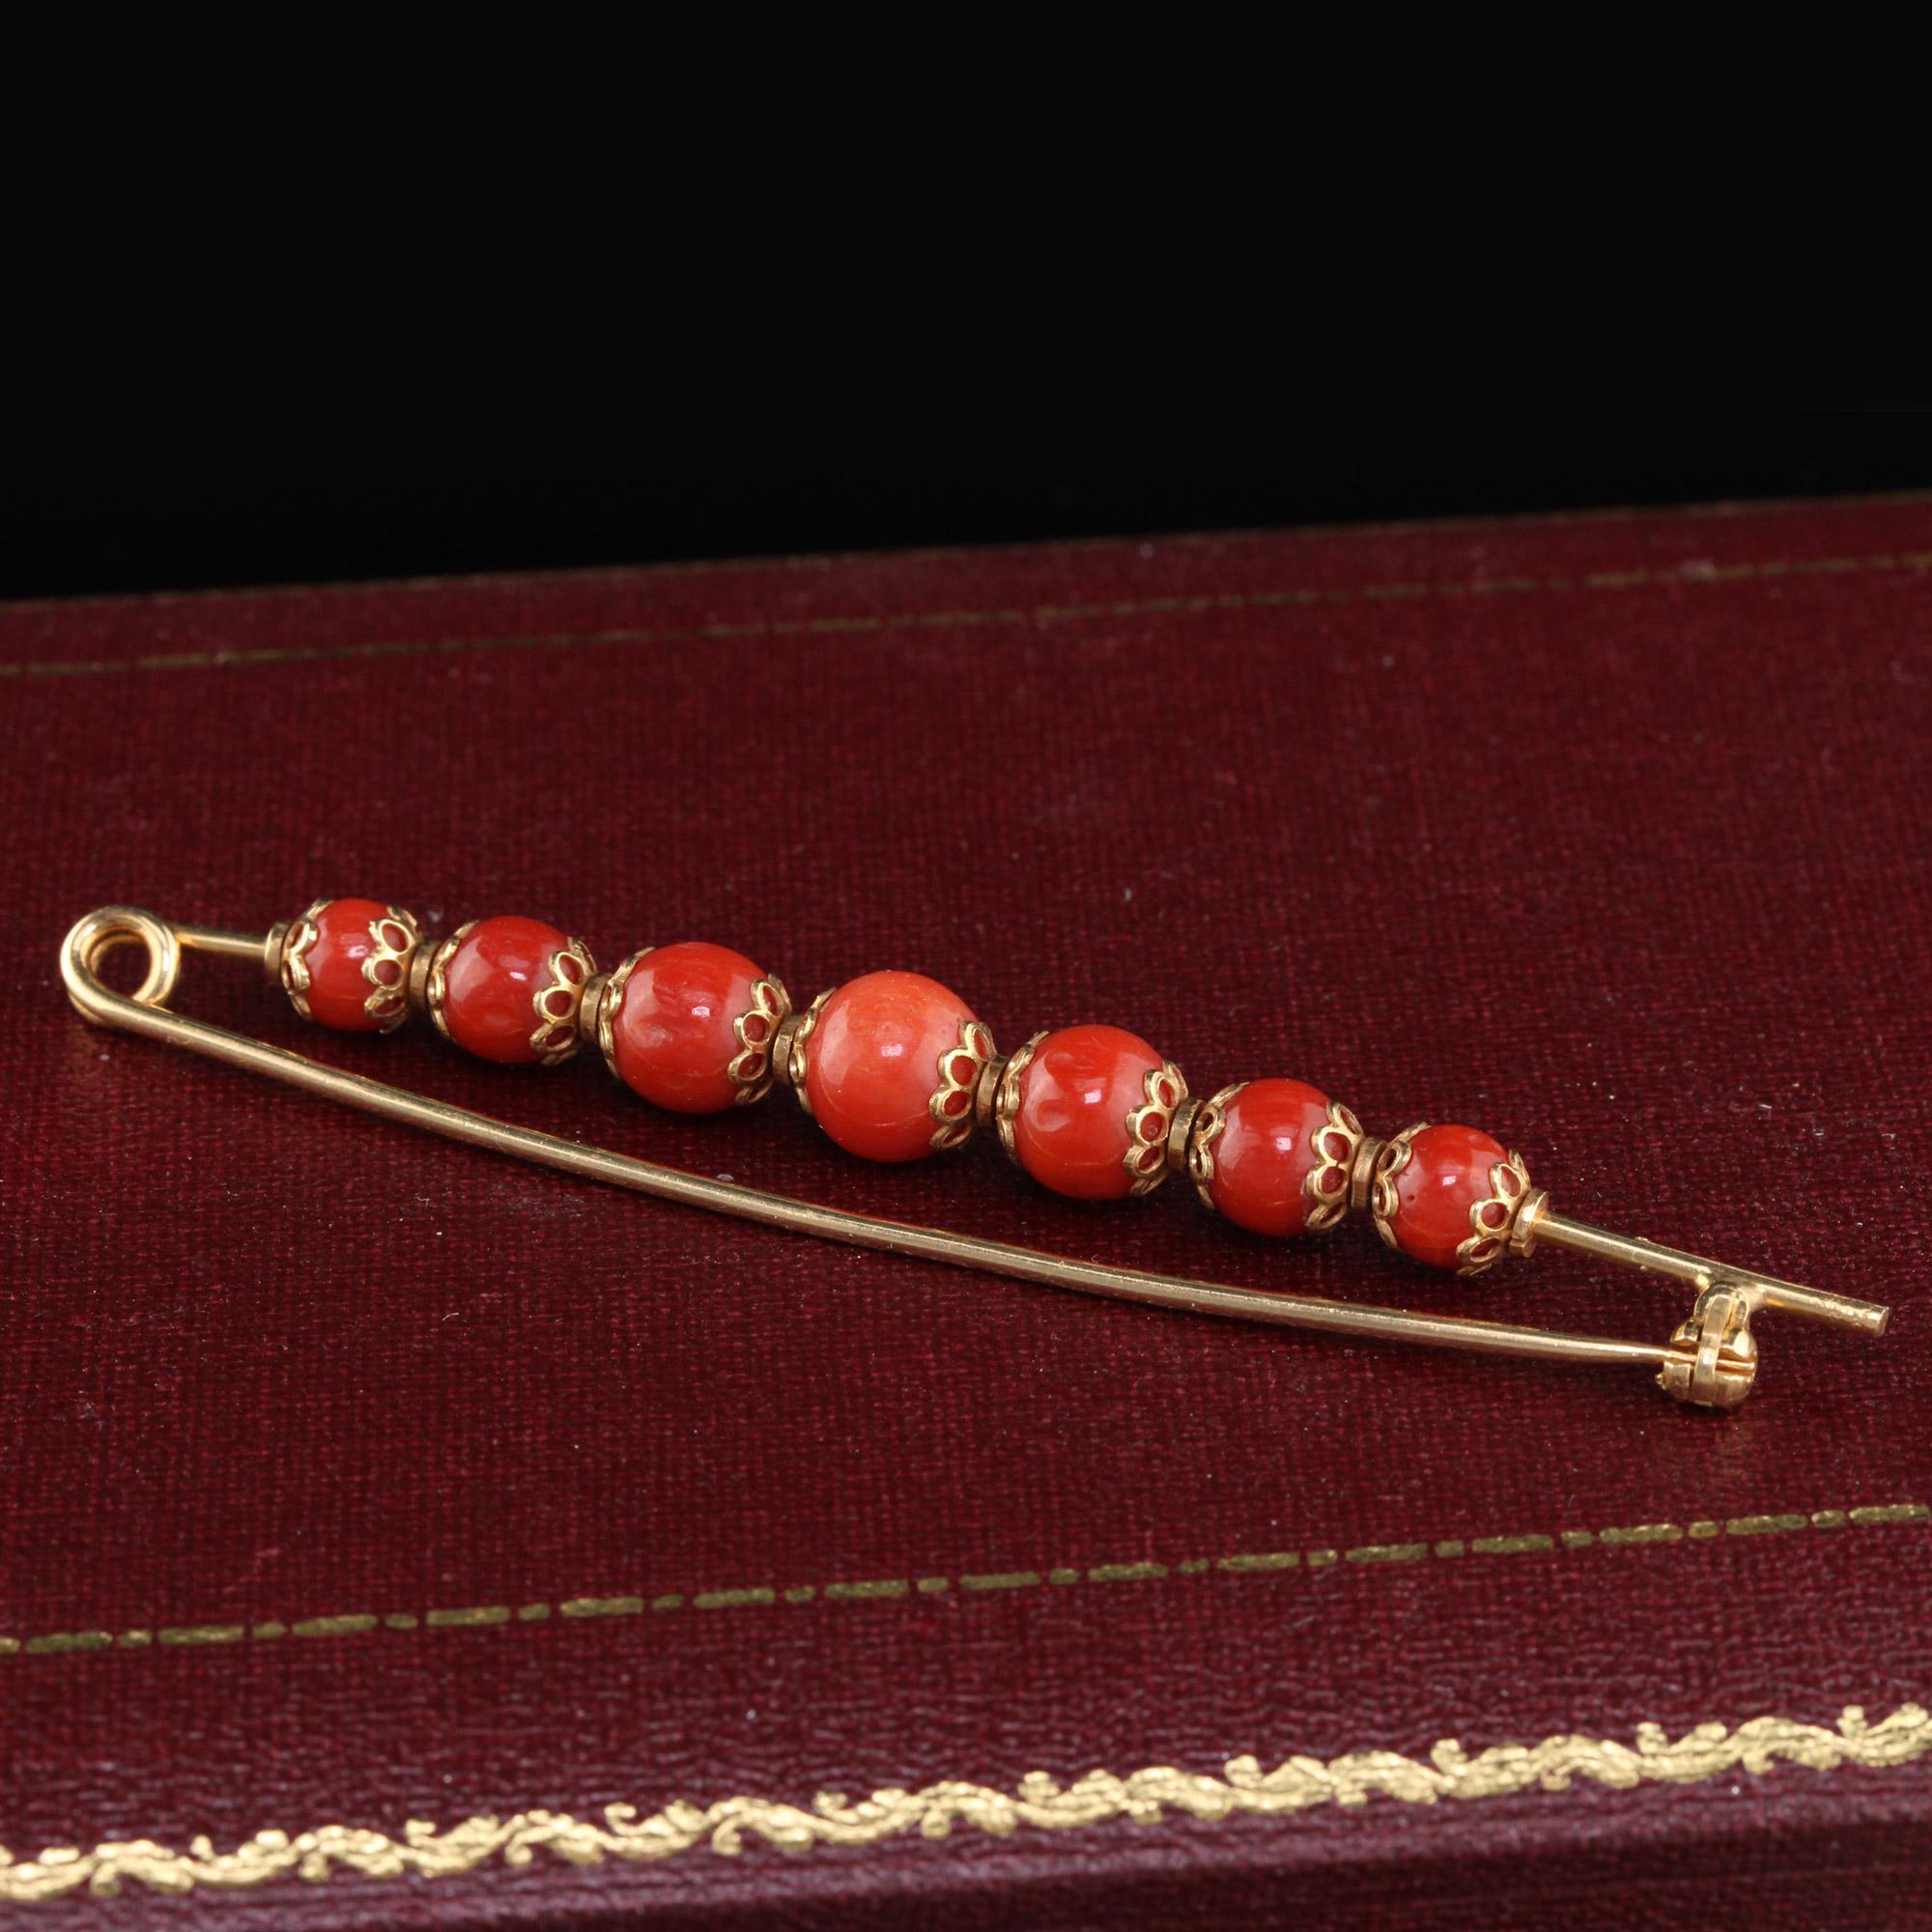 Gorgeous Victorian bar brooch in 18K yellow gold with 7 graduating coral beads.

Metal: 18K Yellow Gold 

Weight: 7.9 Grams

Measurements: Head measures 79.45 x 7.96 mm
